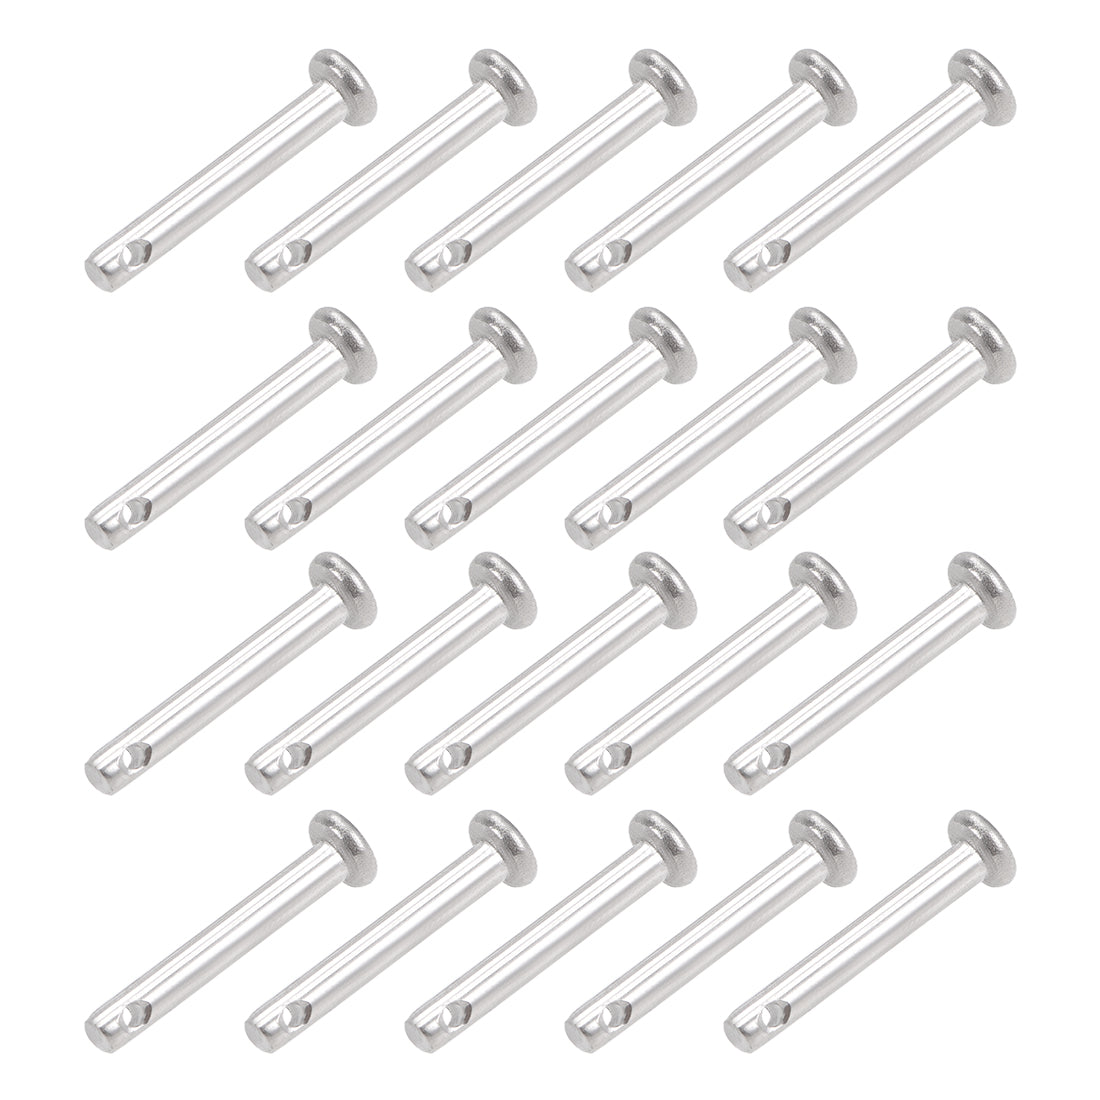 Uxcell Uxcell Single Hole Clevis Pins - 3mm x 10mm Flat Head 304 Stainless Steel Link Hinge Pin 20Pcs